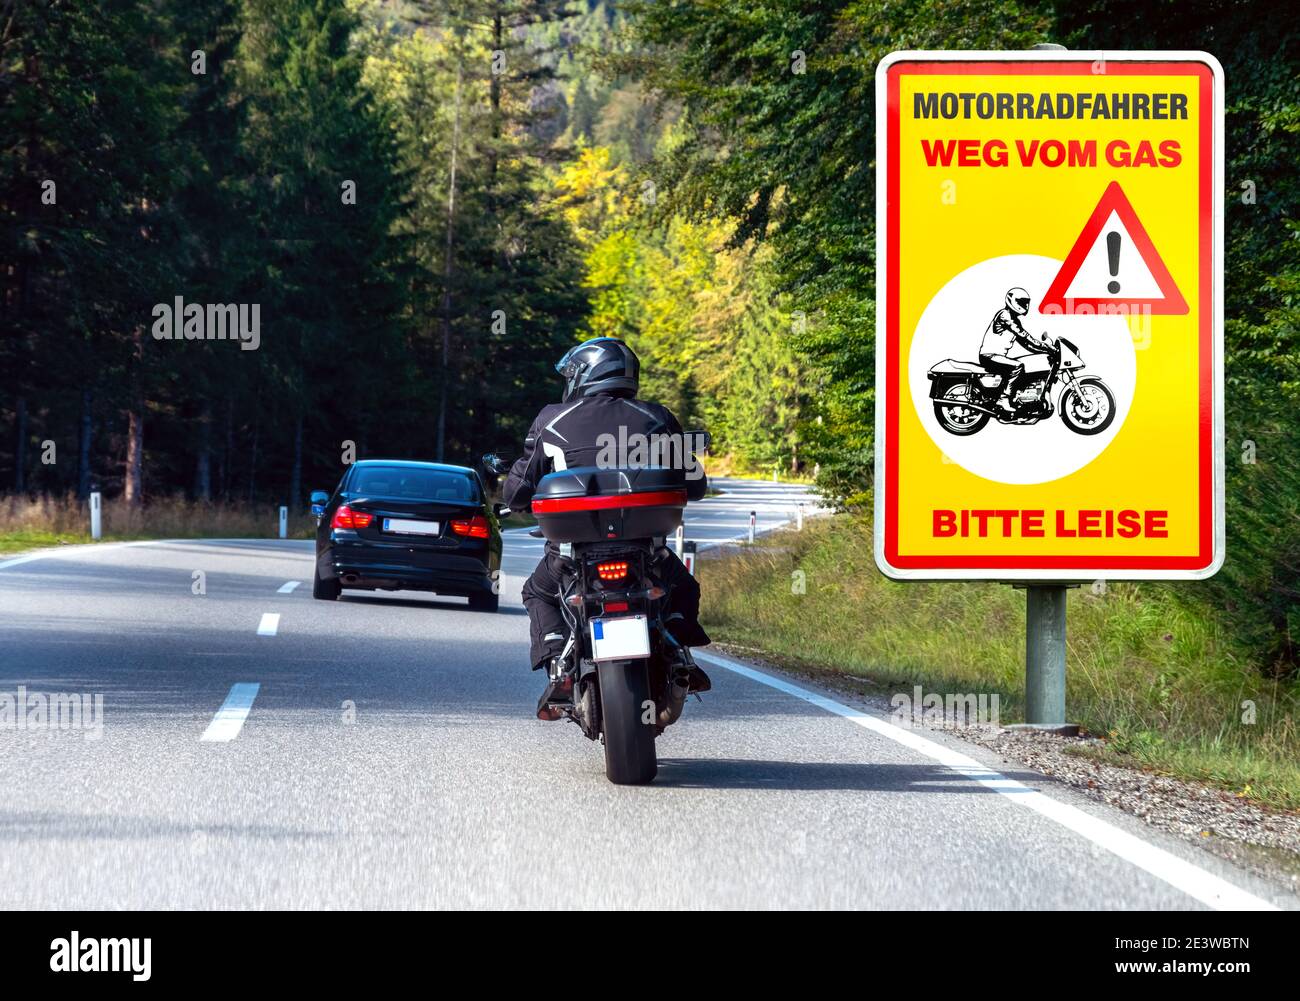 Driving scene on the road with motorcyclist and traffic sign 'Motorradfahrer weg vom Gas -Bitte leise-' (motorcyclist off the gas - please quiet) Stock Photo